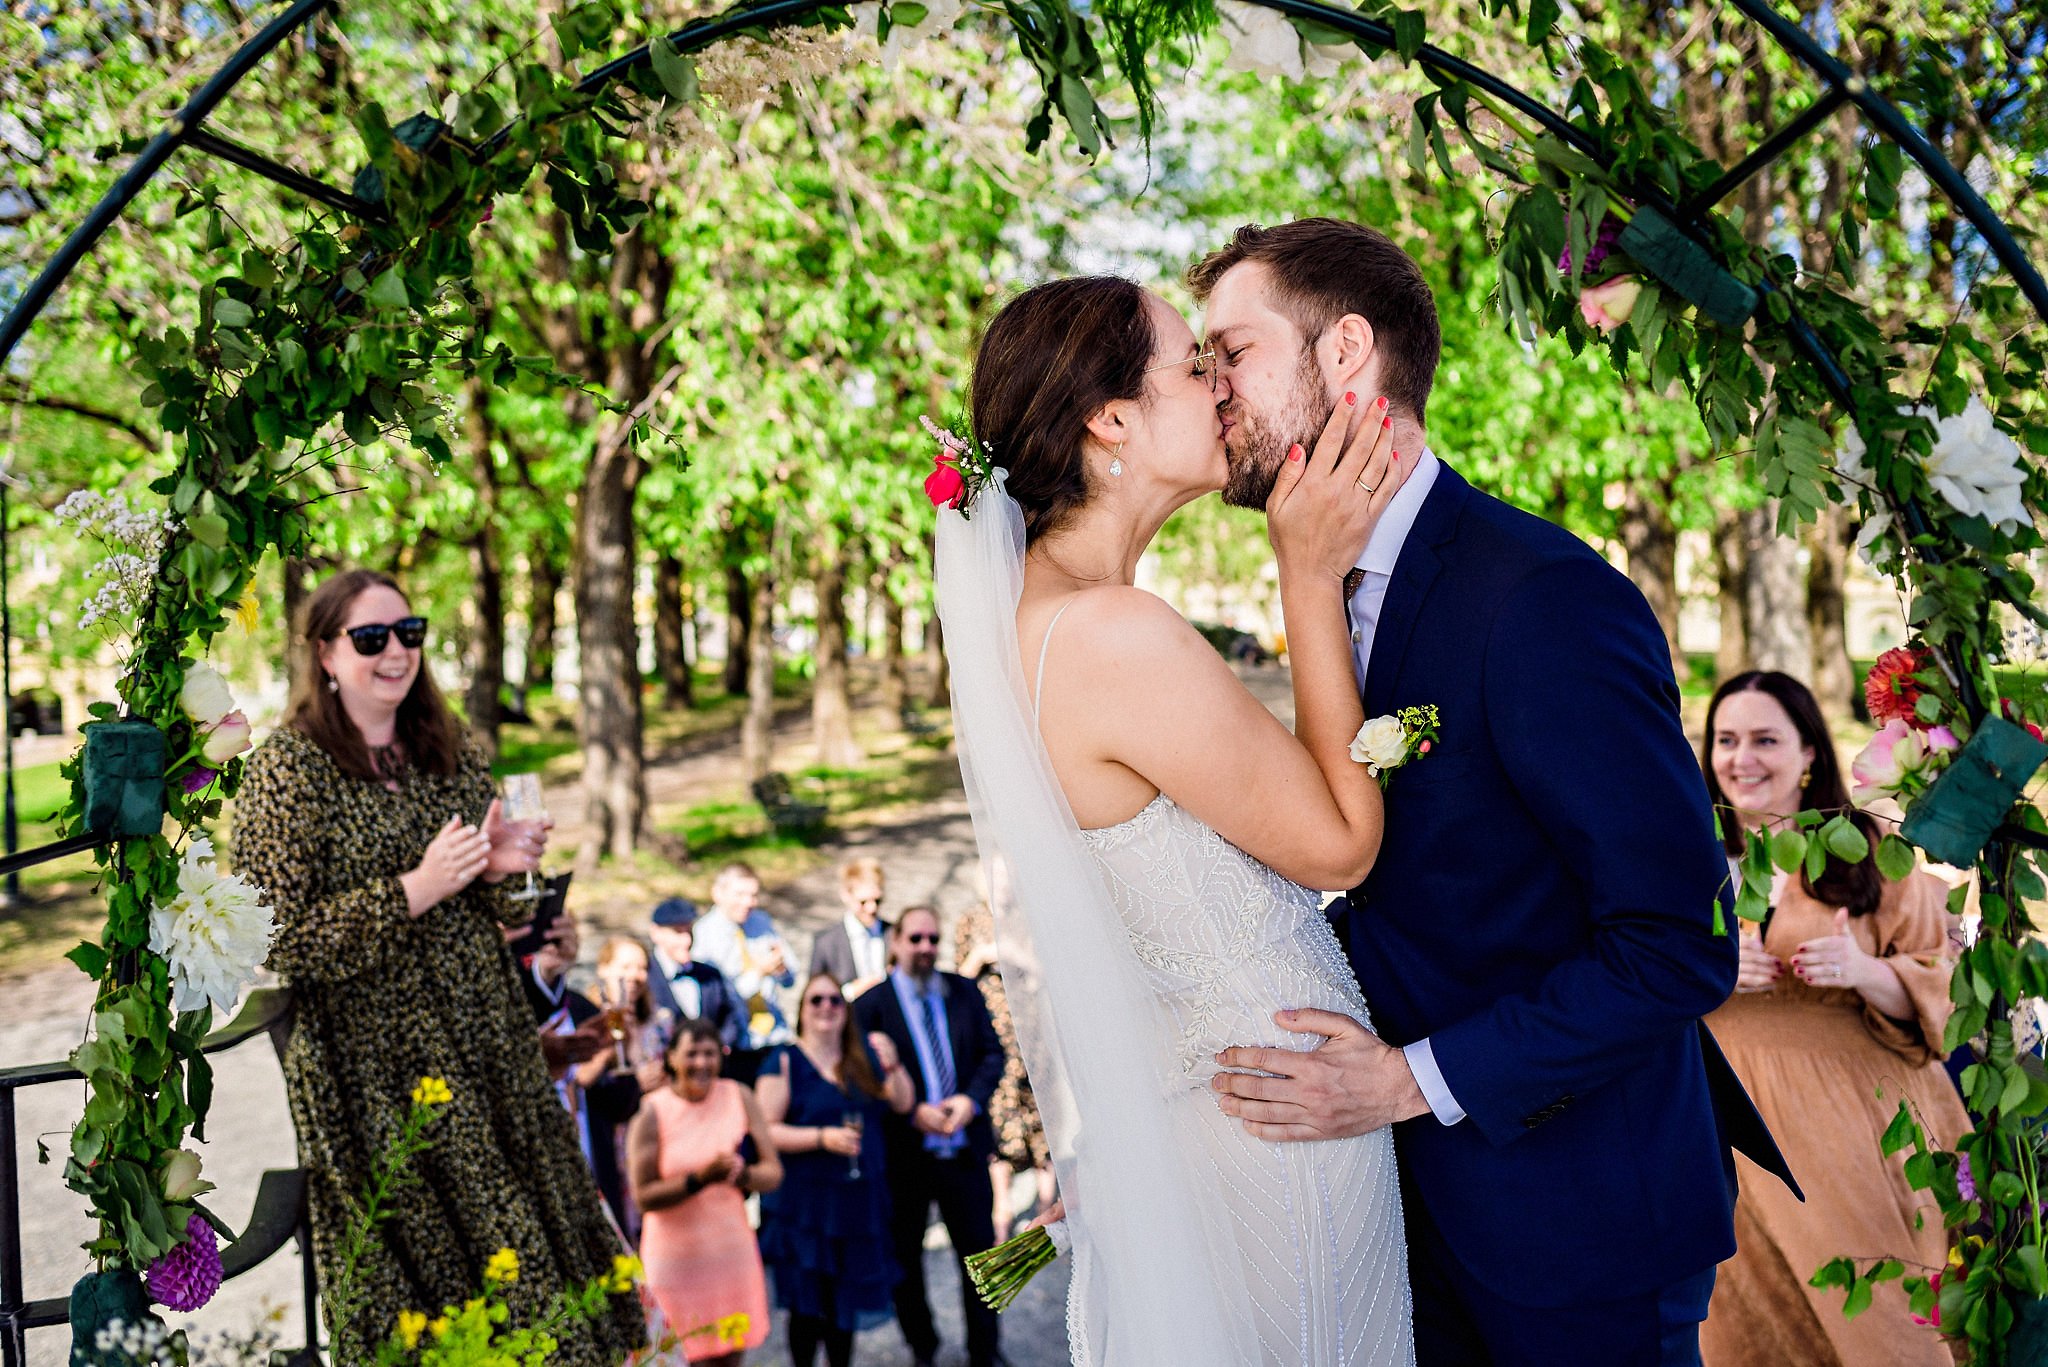 Bride and groom's first kiss in outdoor ceremony at Torshovparken in Oslo